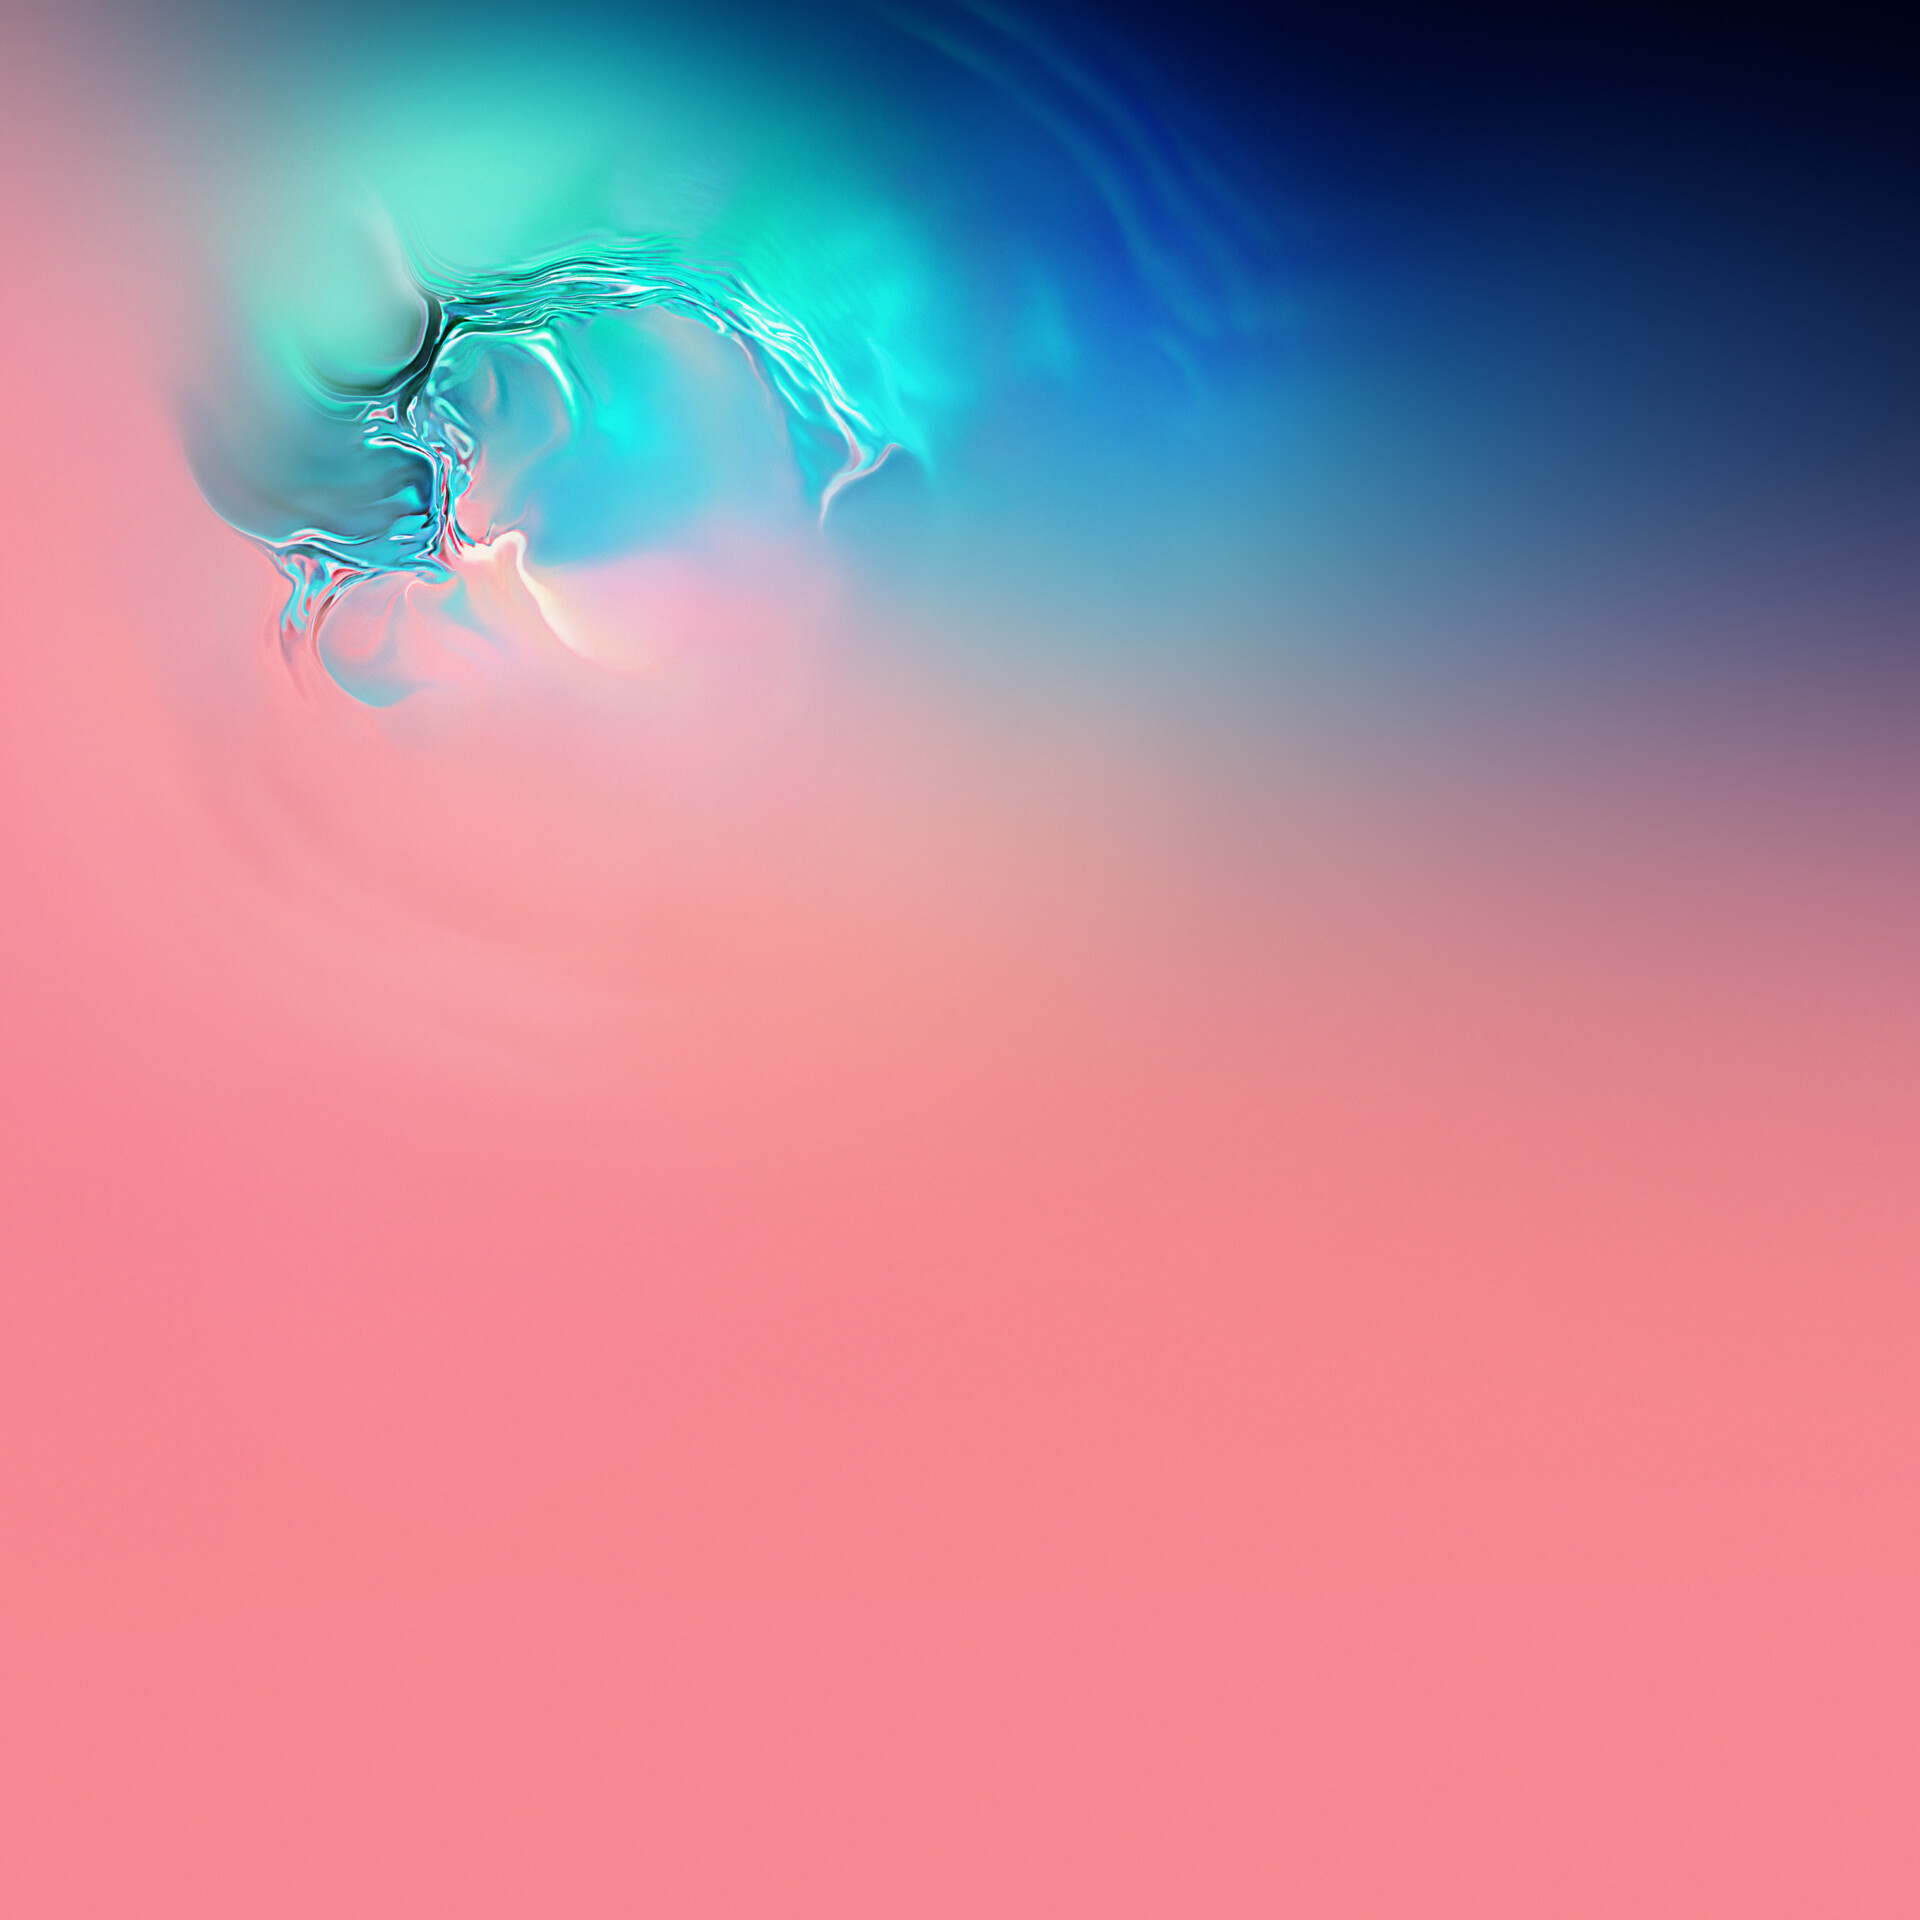 Samsung Galaxy S10 Wallpaper Are Here Grab Them At Full Resolution